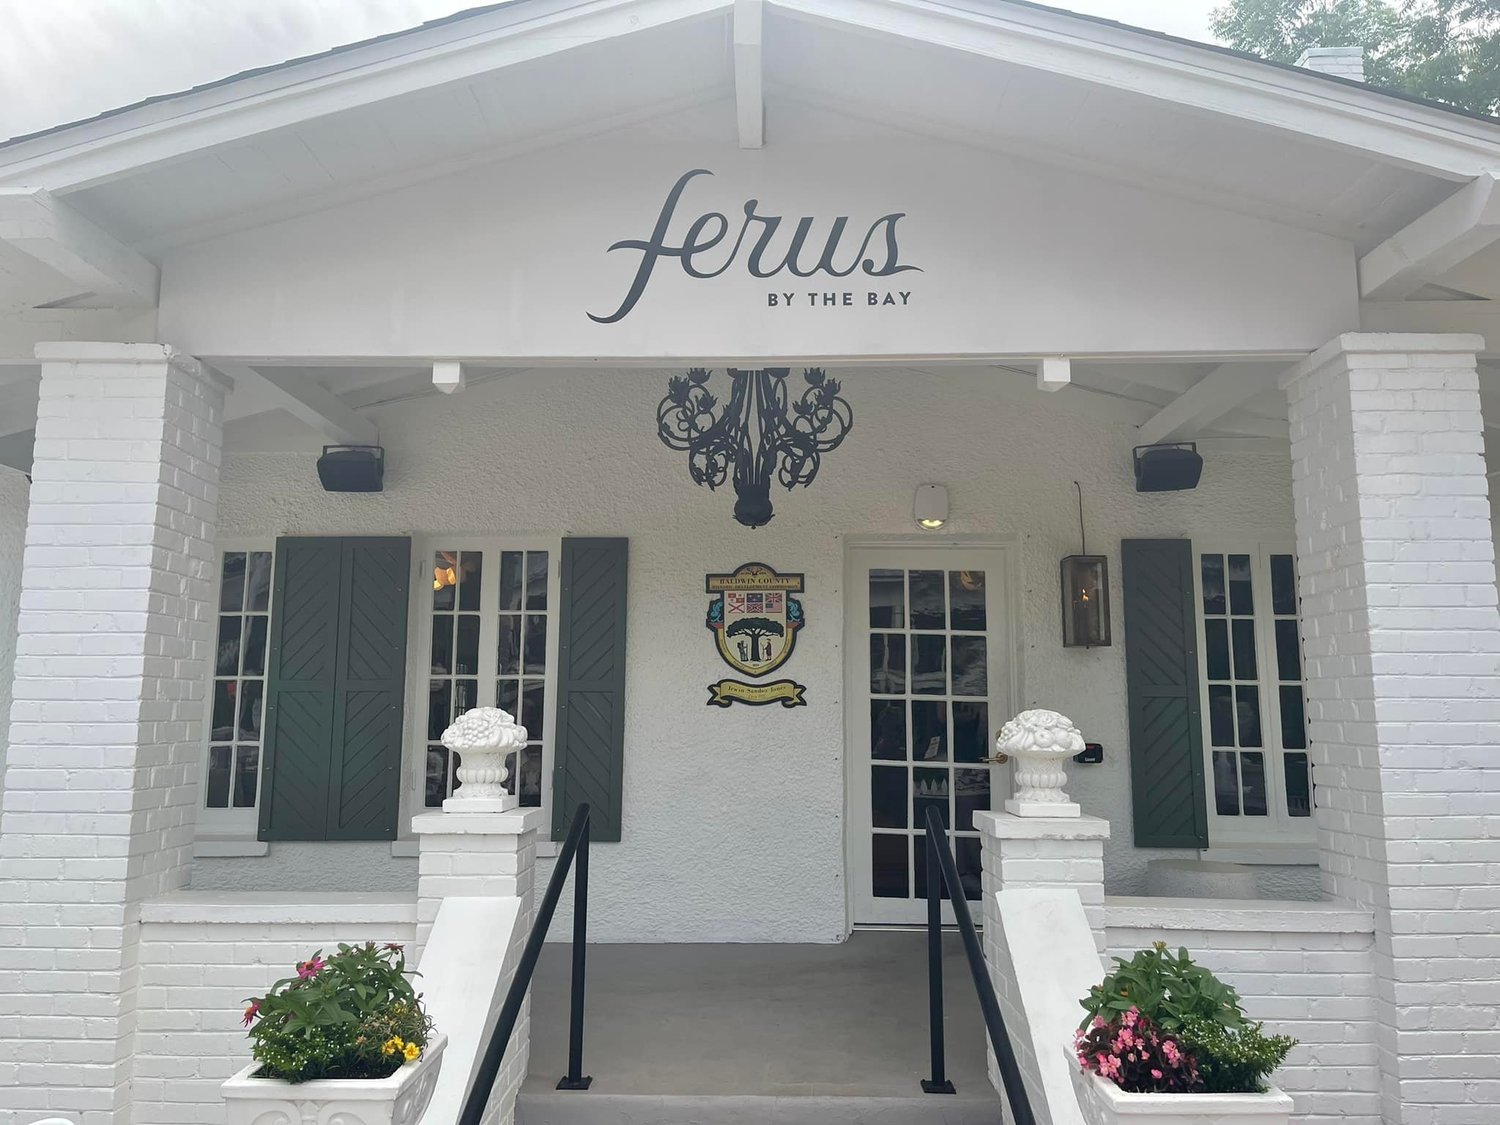 Ferus By the Bay just opened May 2022 and is located on the corner of Church Street and De La Mare Avenue at 51 South Church St., Fairhope.